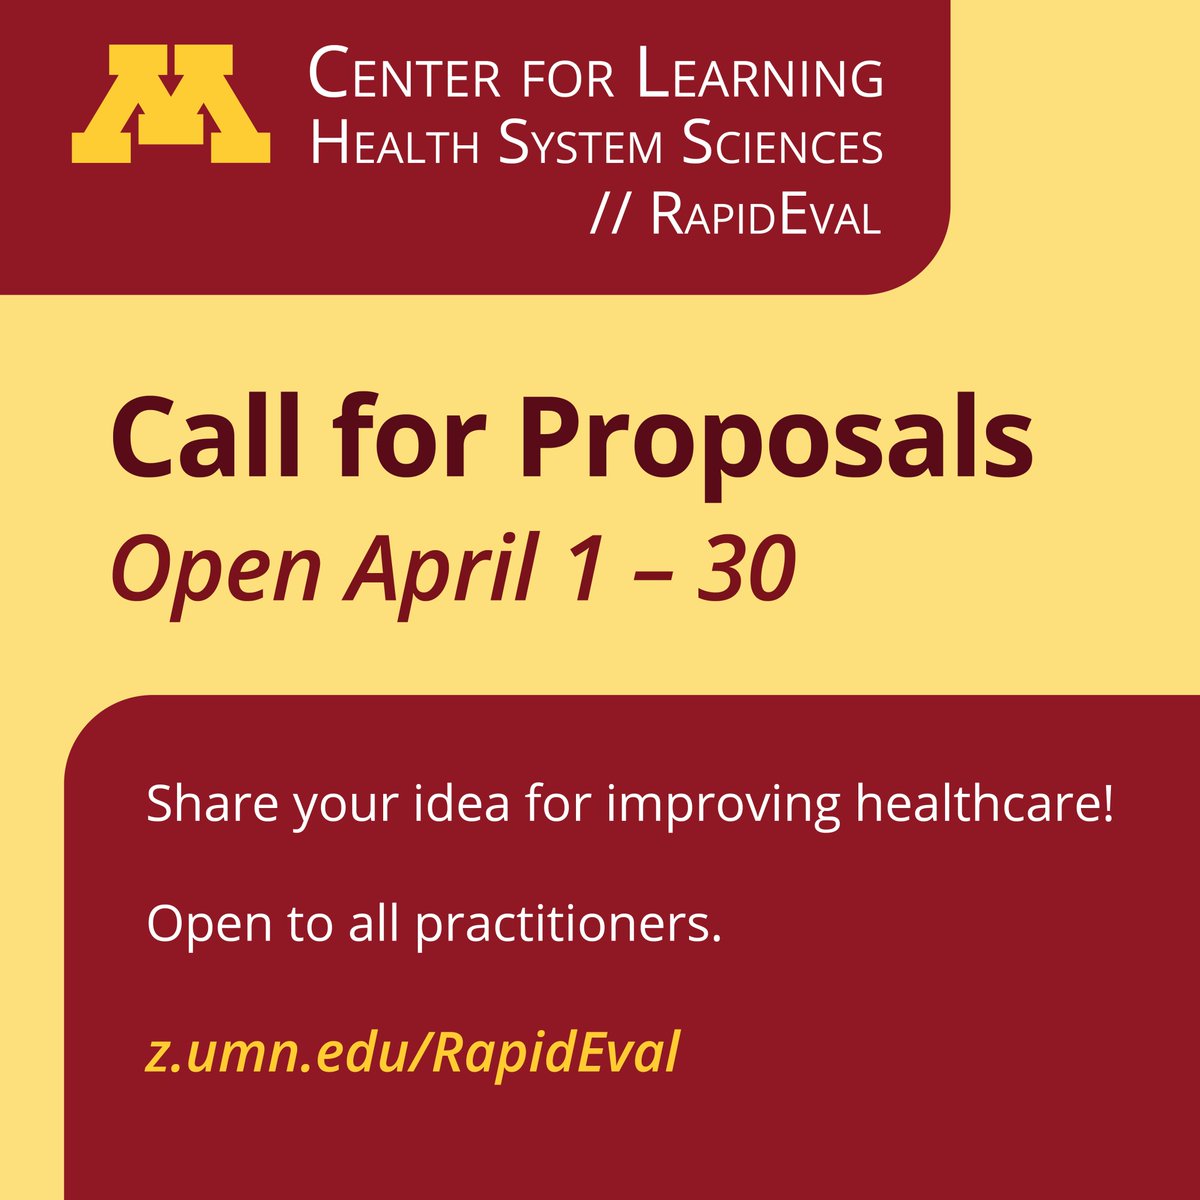 The @umnclhss RapidEval program's call for proposals will remain open until April 30 at 5 pm! Interviews for application finalists will occur on Tuesday, June 4th, between 1-4pm. Learn more ➡️ bit.ly/4cDIDOW.